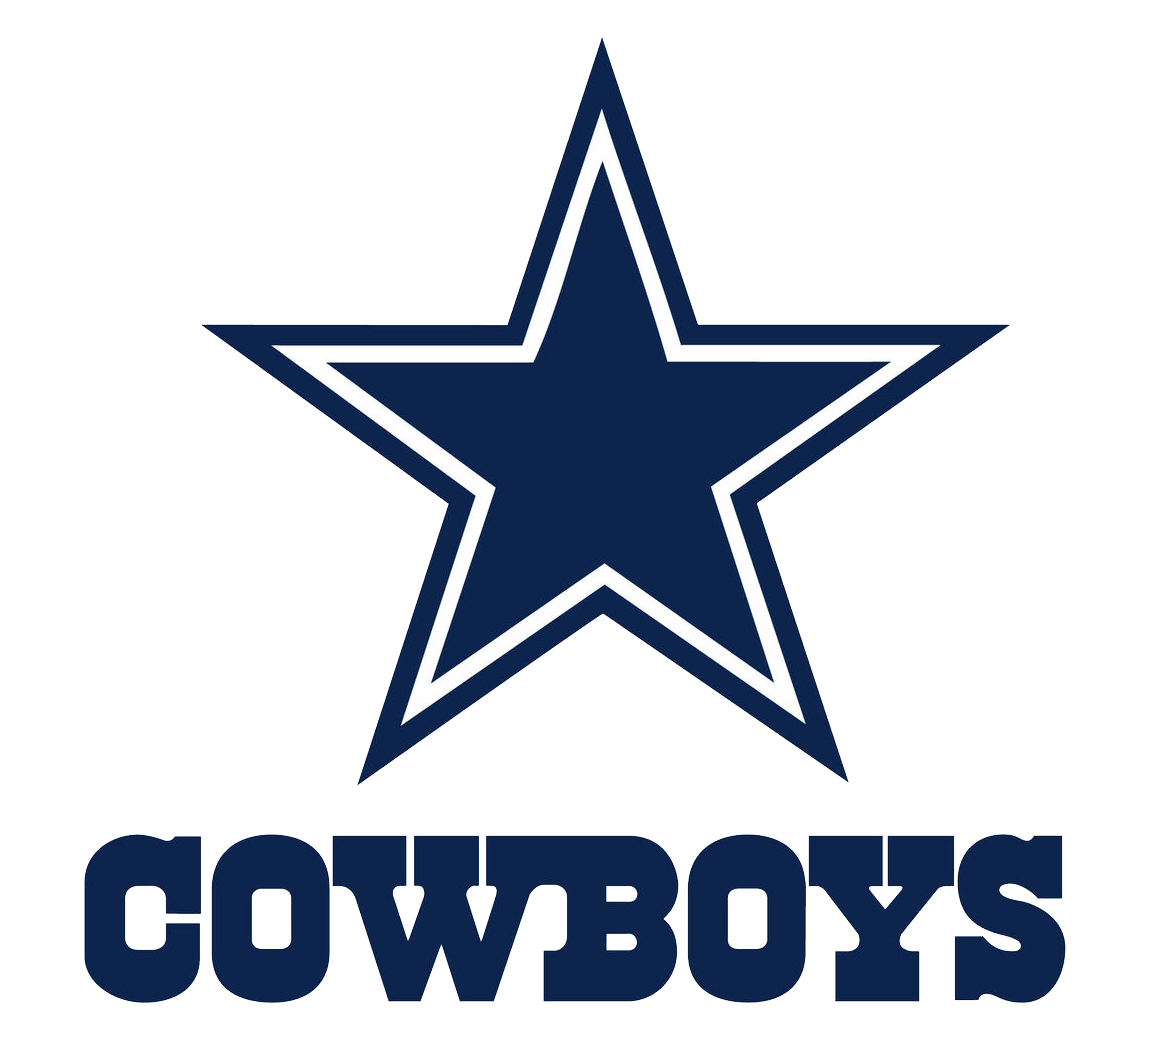 Dallas Cowboys Logo - Dallas Cowboys Logo, Dallas Cowboys Symbol Meaning, History and ...